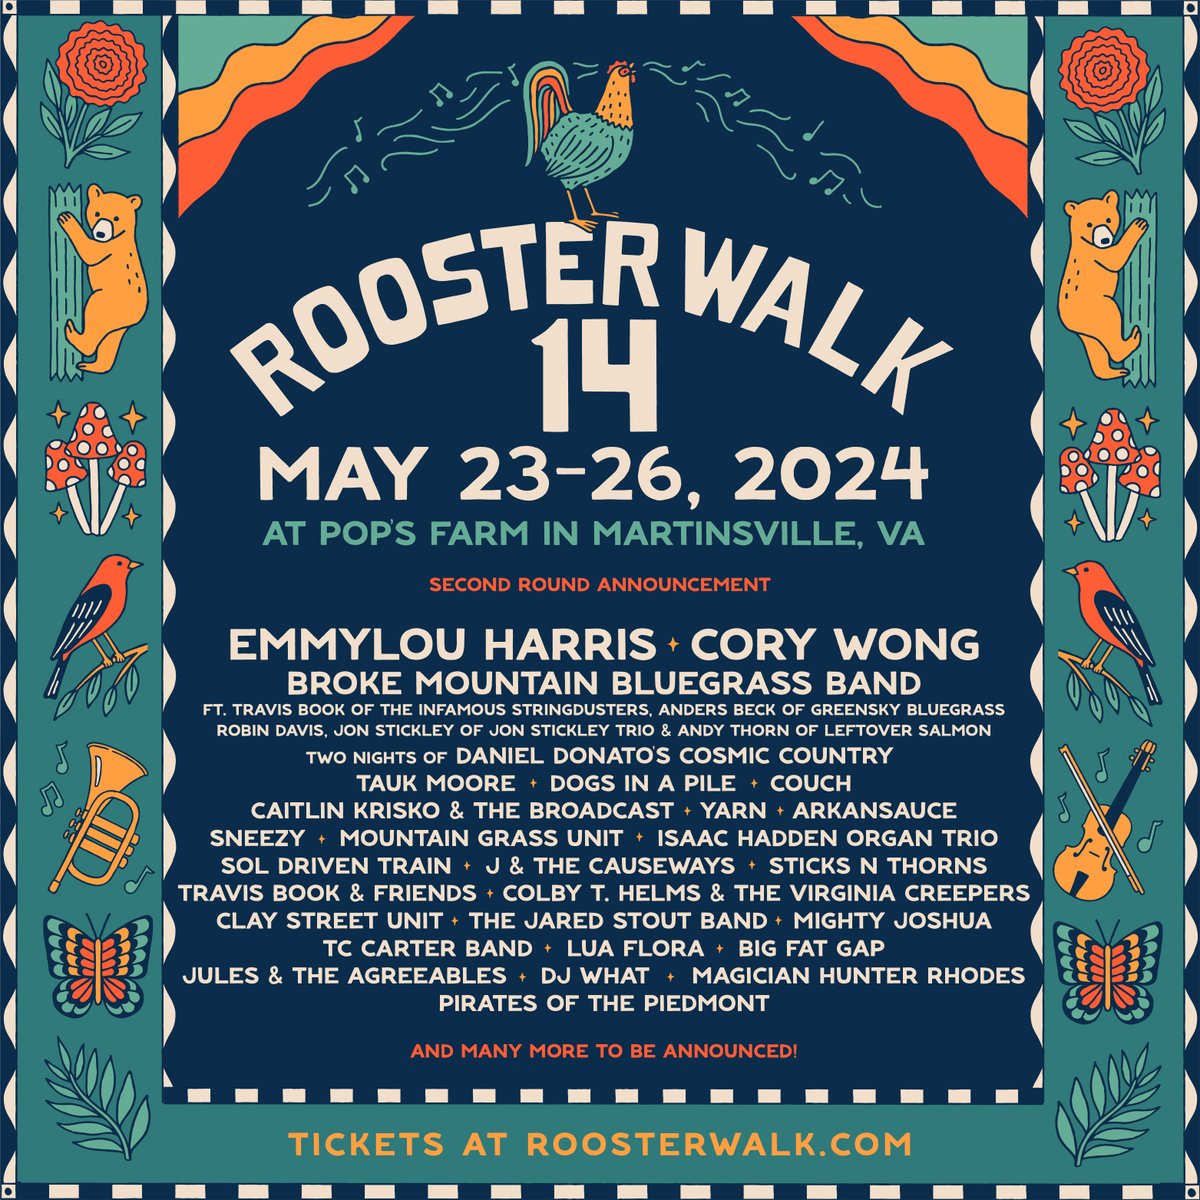 Excited to join the @RoosterWalk 14 lineup! Join us in Martinsville, VA this May! Tickets + info: RoosterWalk.com